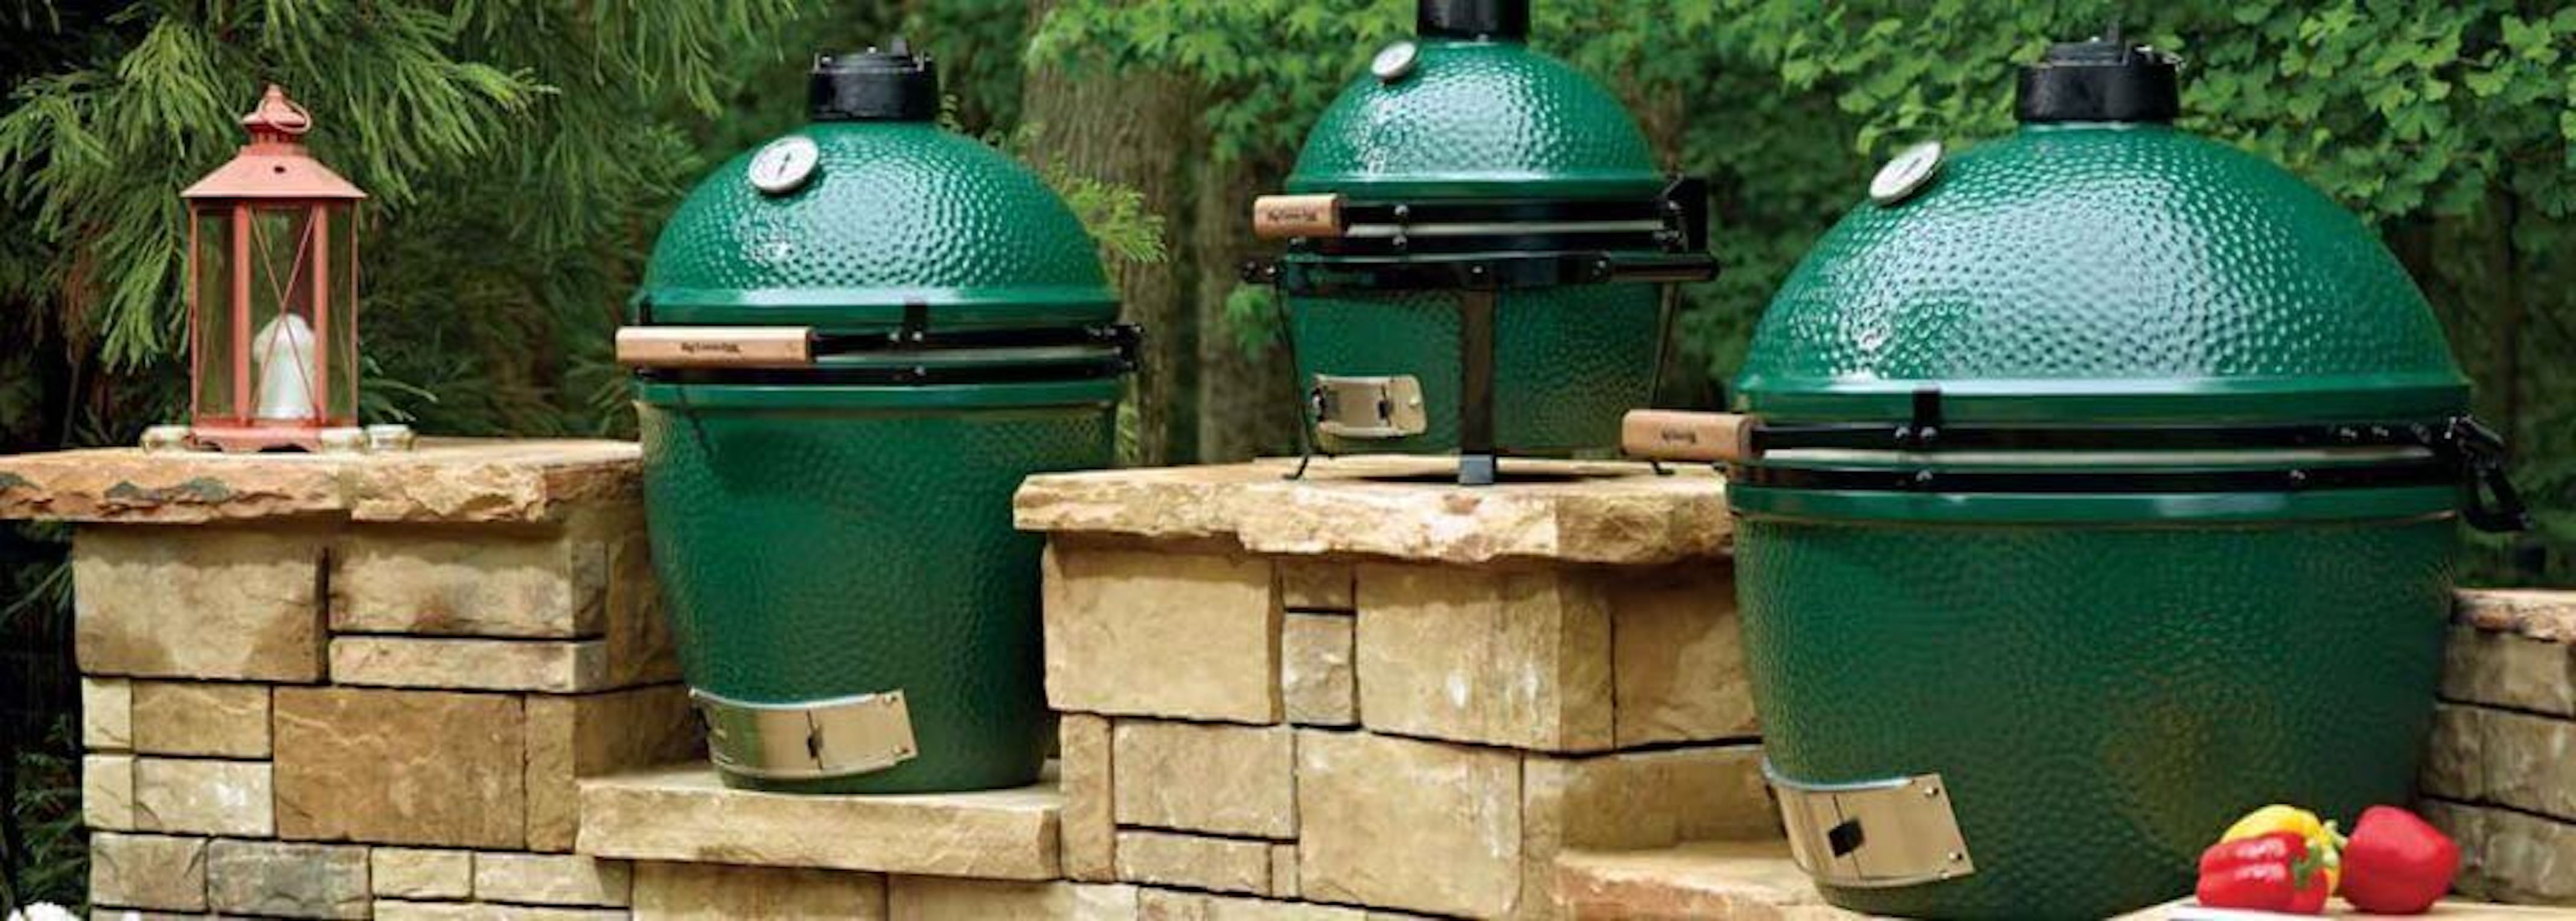 Green Egg Small Charcoal Grill